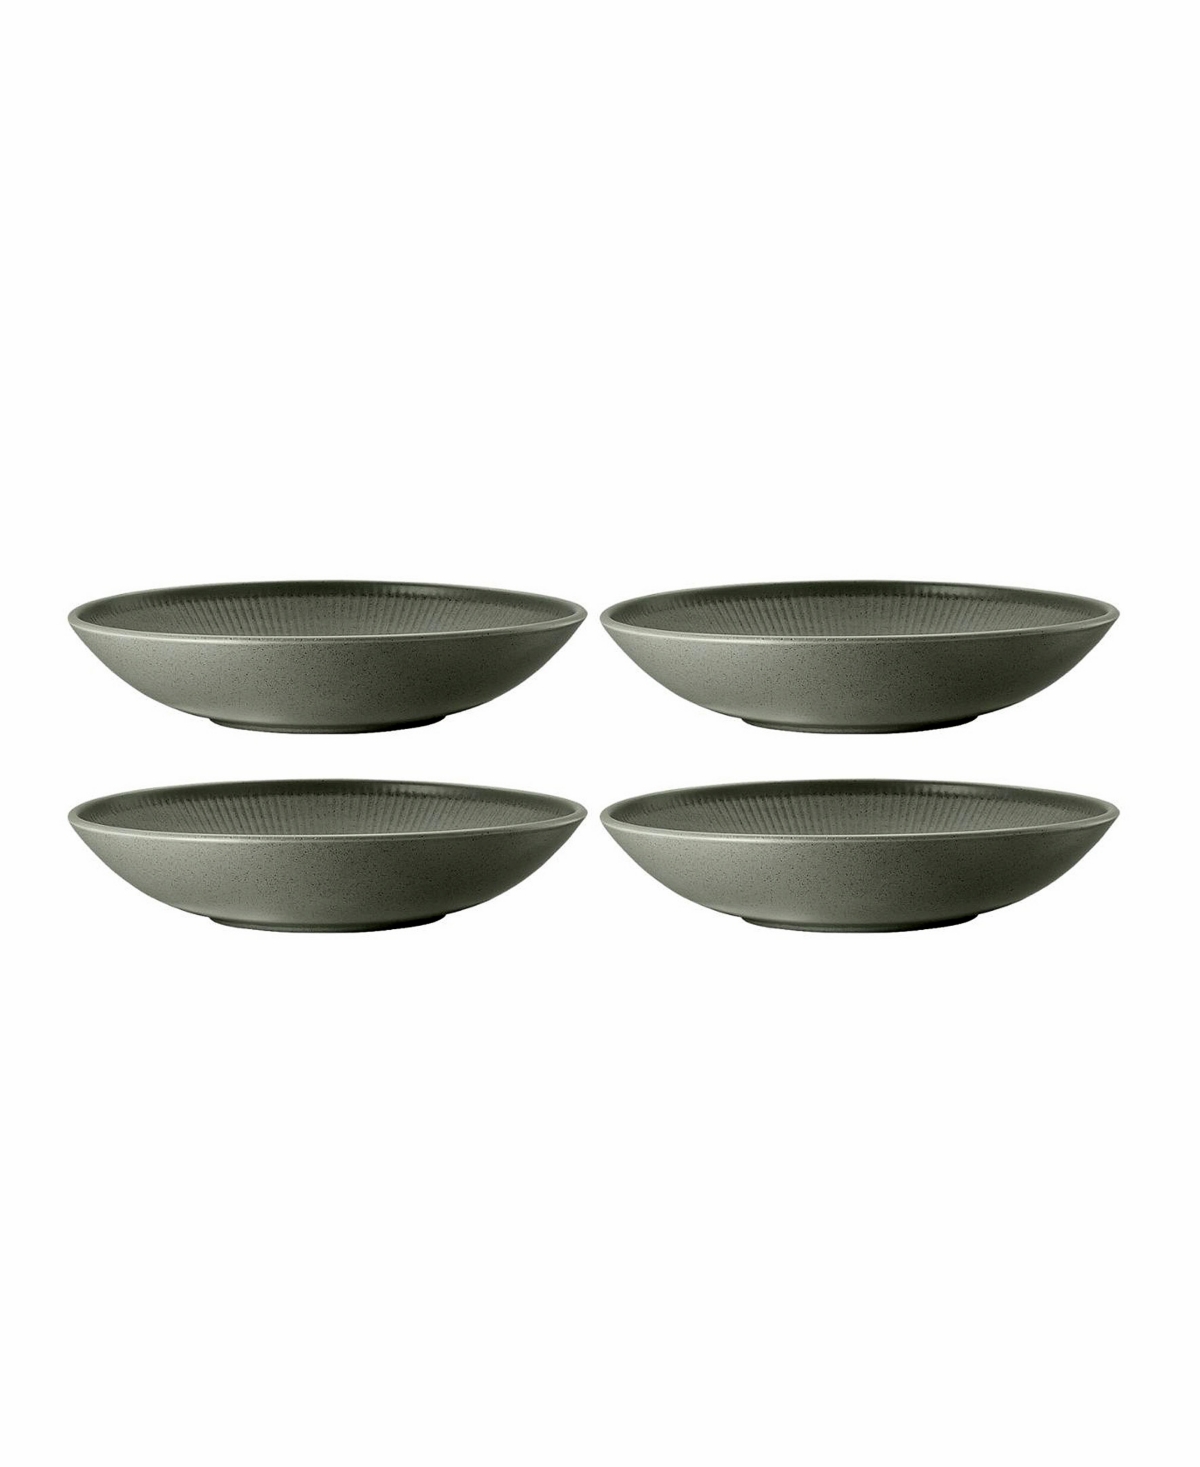 Clay Set of 4 Soup Plates, Service for 4 - Gray